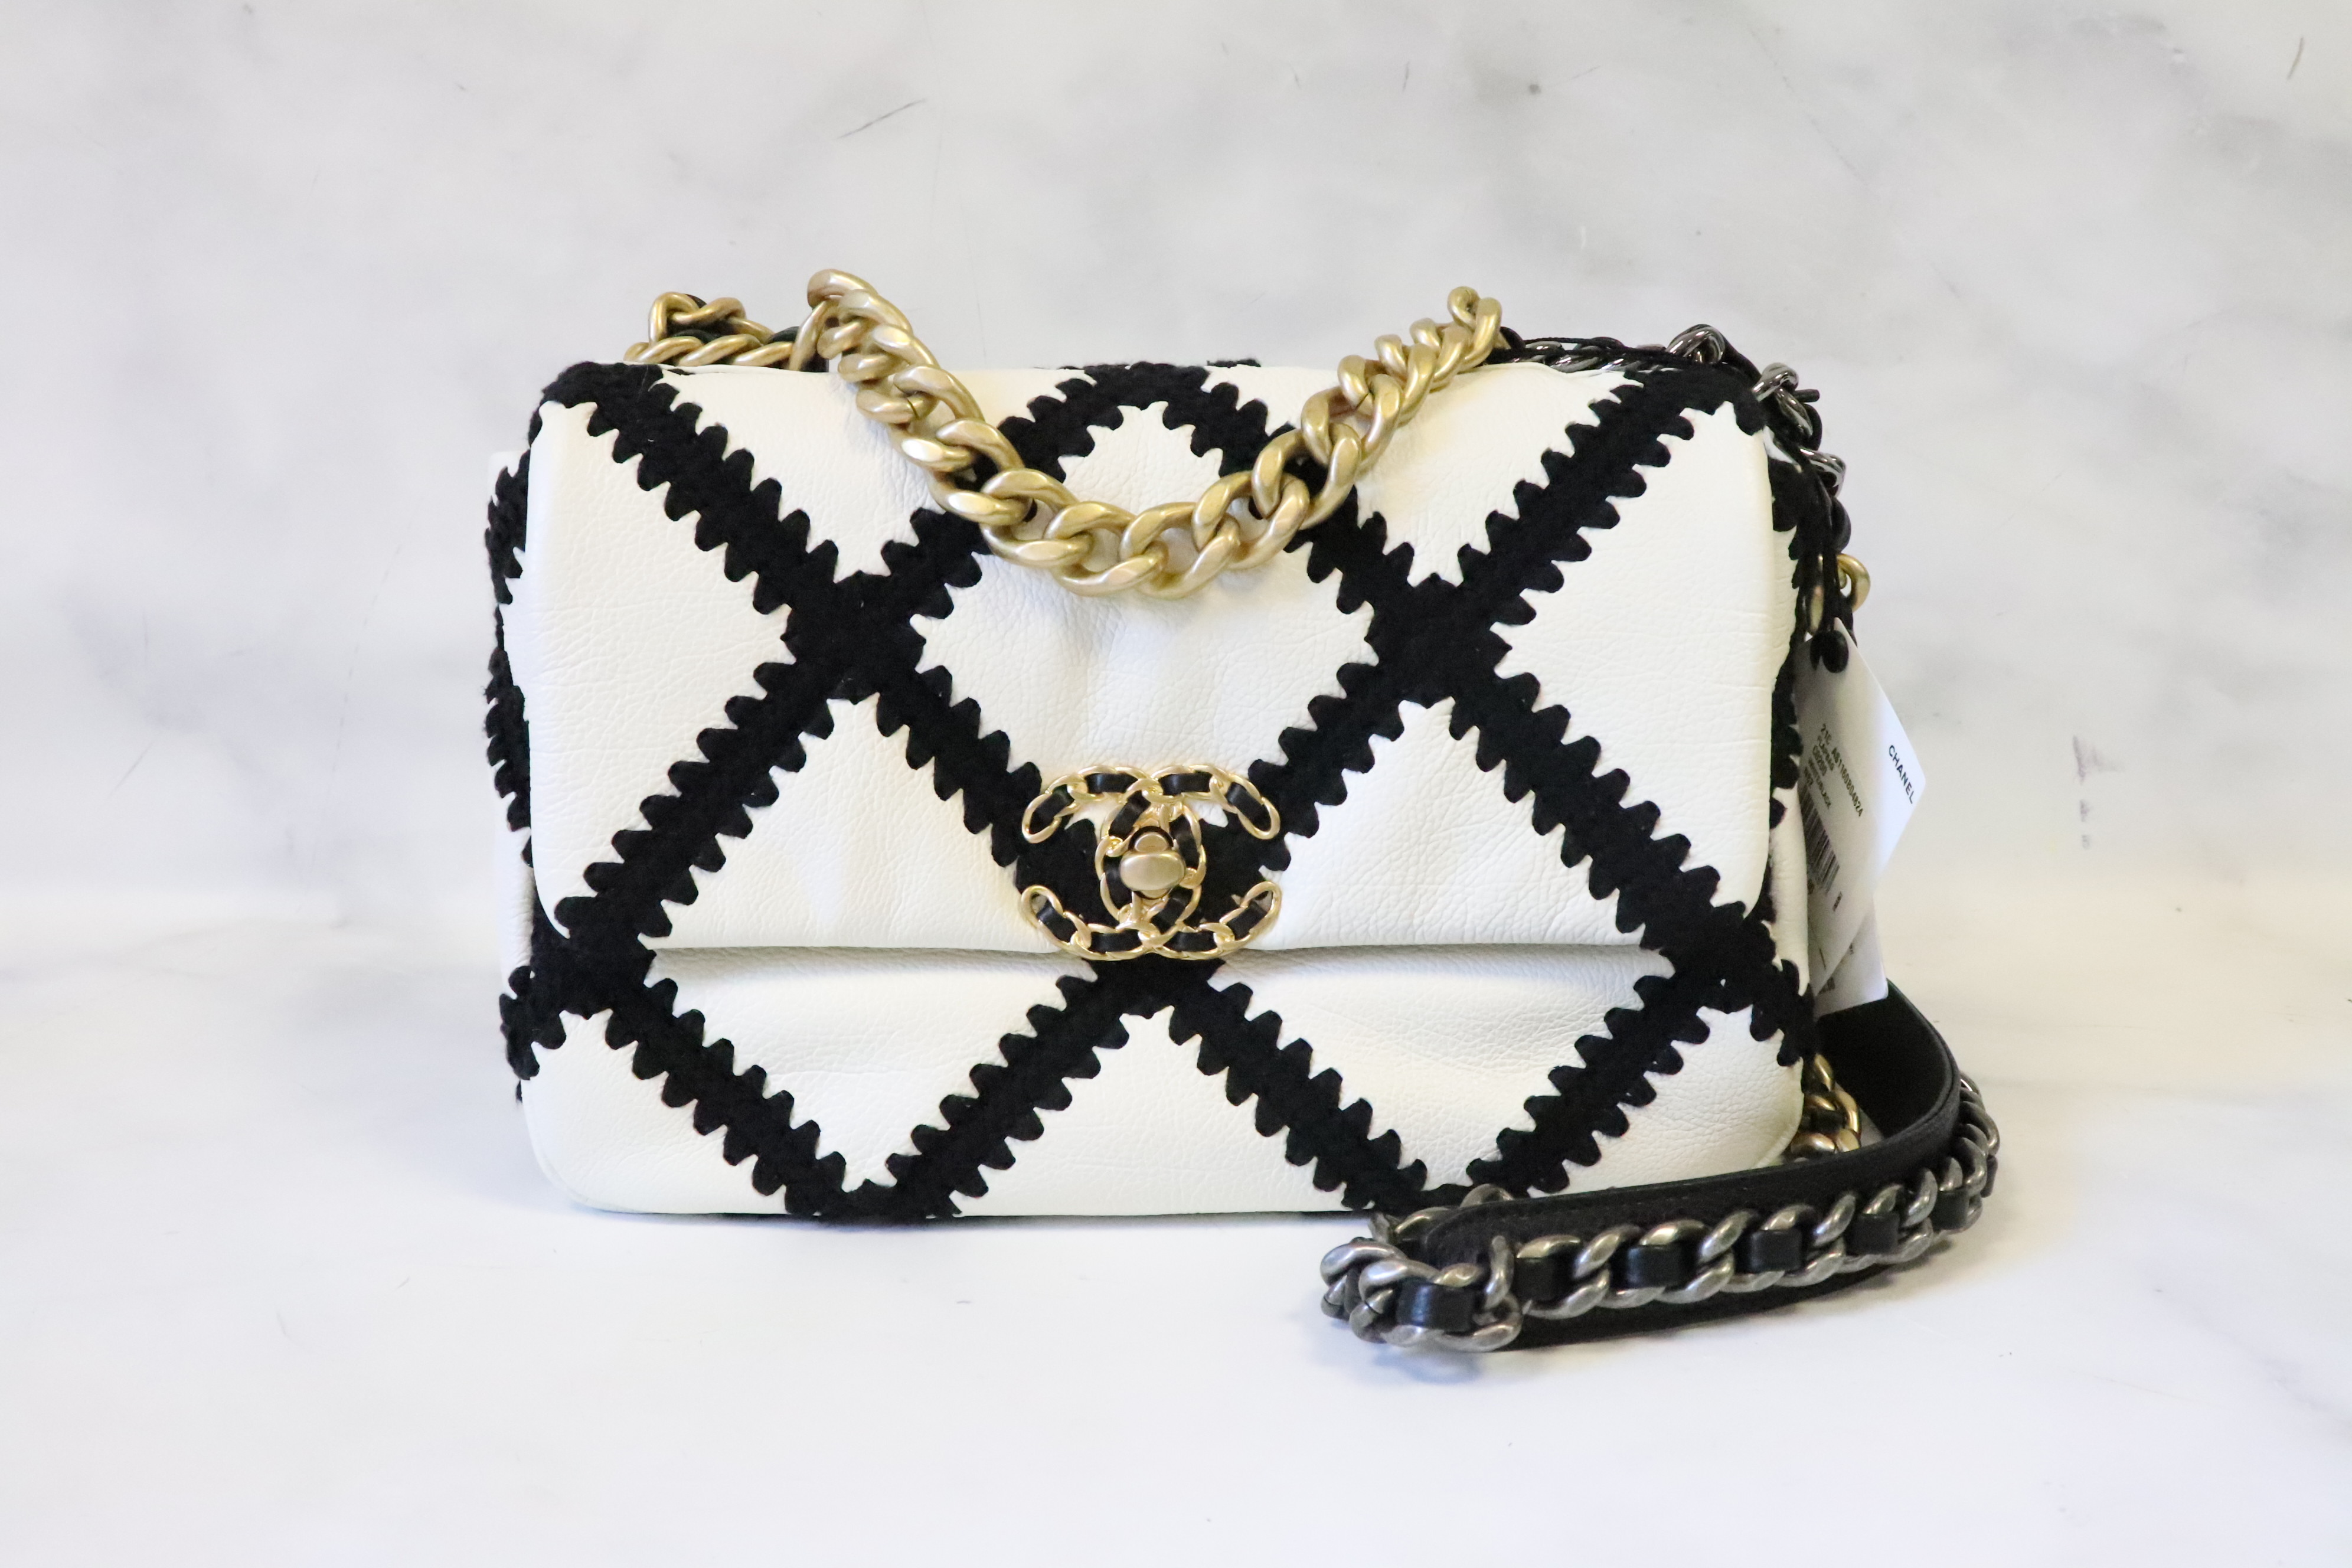 Chanel 19 Large Flap Quilted Leather Shoulder Bag White (2019)